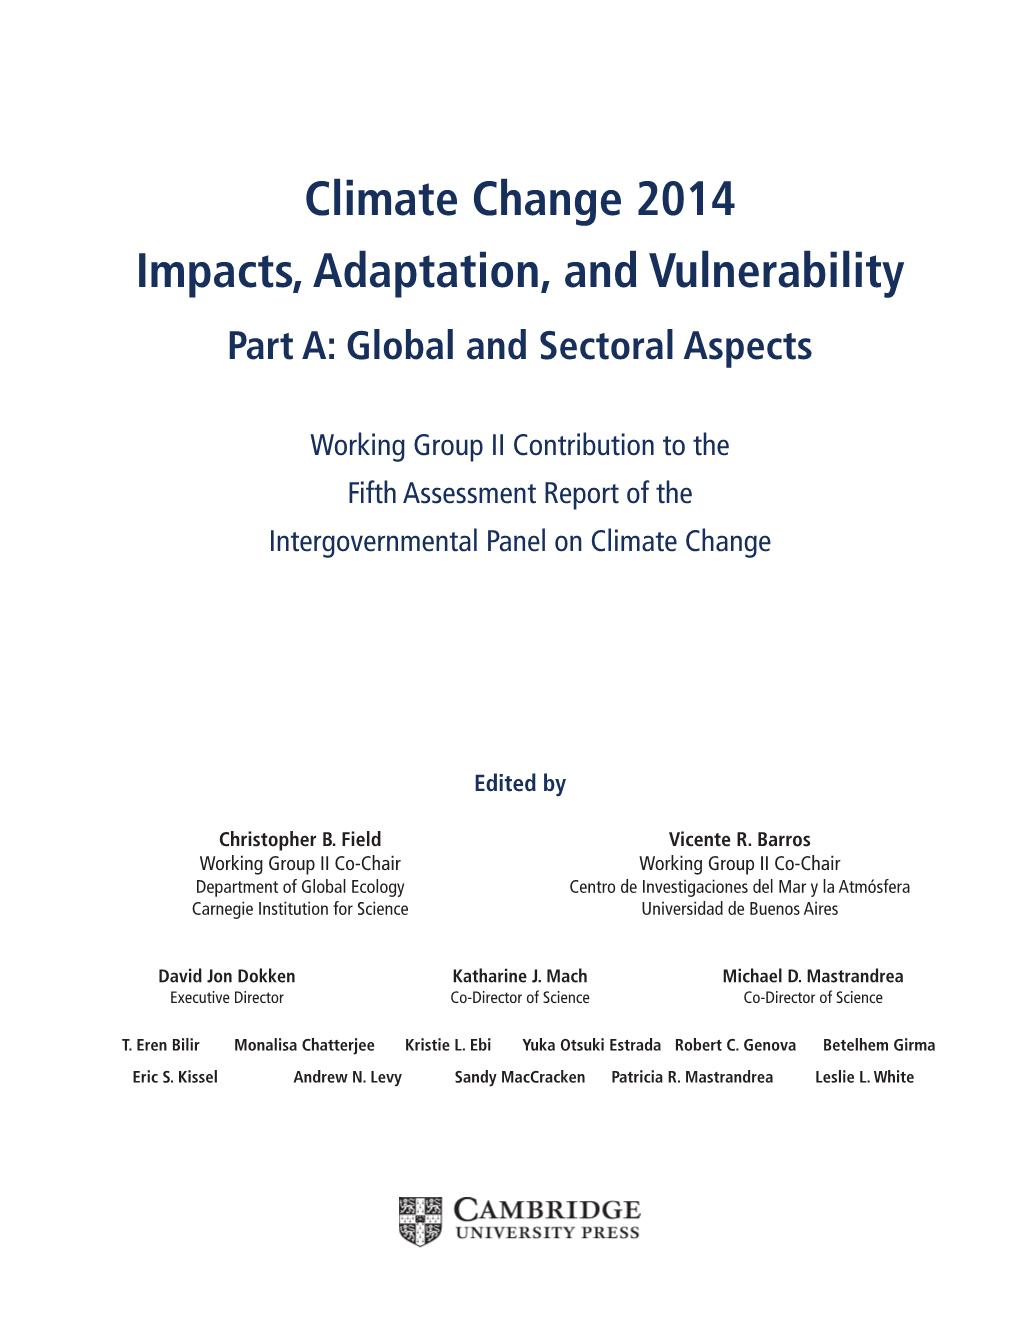 Climate Change 2014: Impacts, Adaptation, and Vulnerability